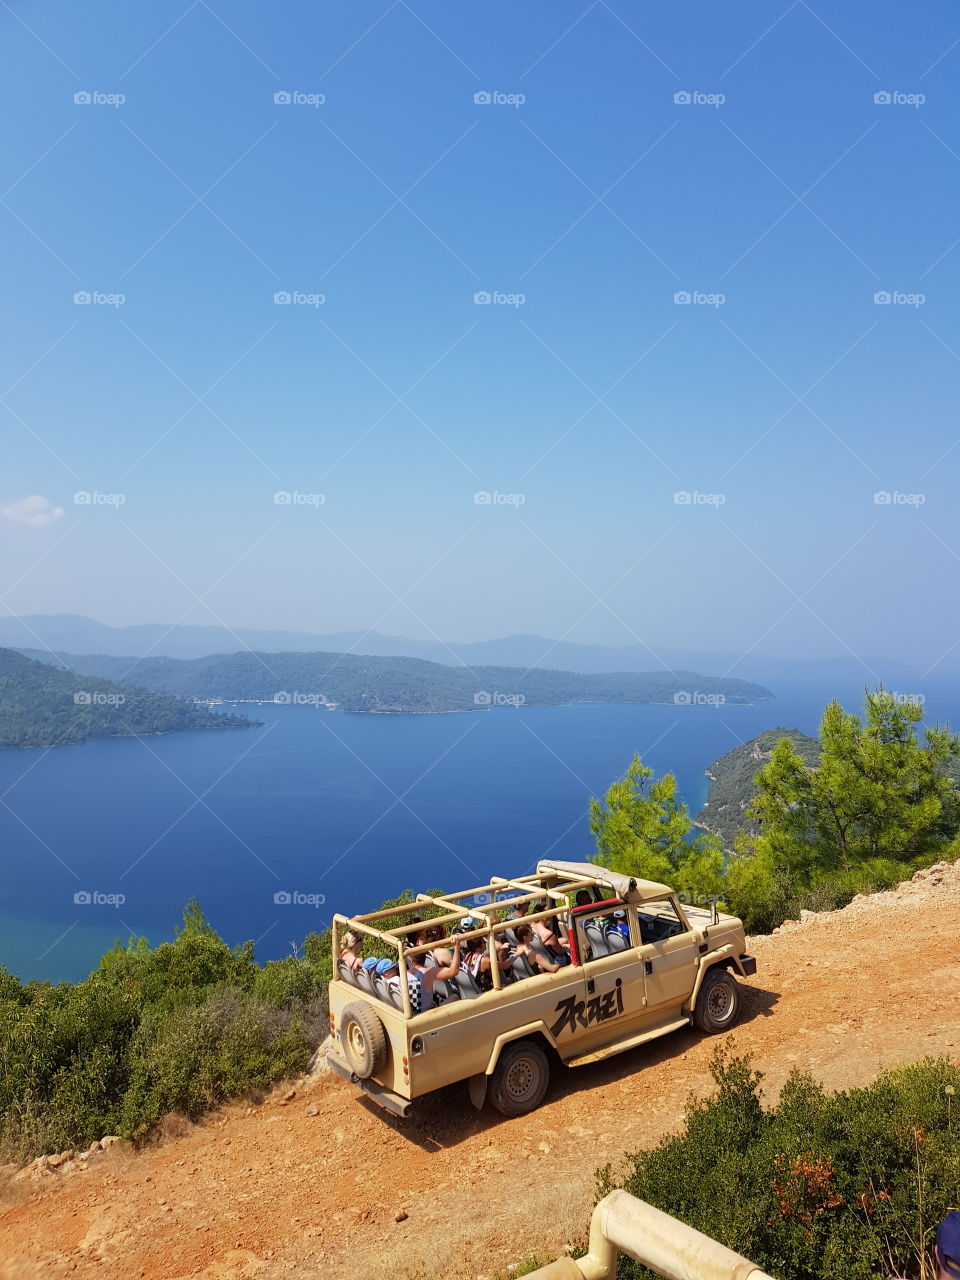 Jeepsafari on a beautifull day in Turkey.On the mountains offroad with an incredible panorama.